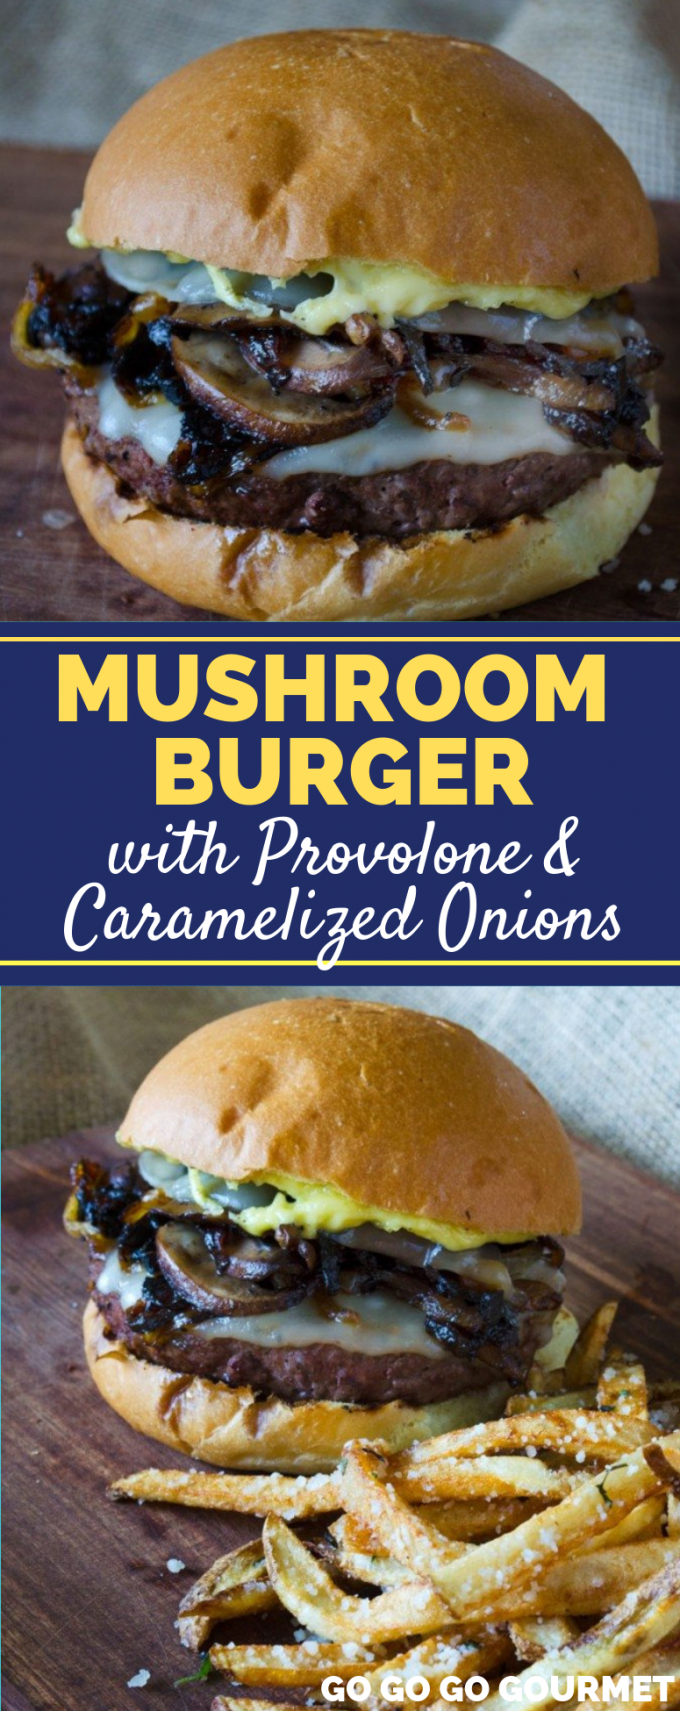 This Mushroom Burger with Provolone and Caramelized Onion is the best portobello burger recipe! Topped with an aioli  sauce that is delicious, you could even add swiss to send this sandwich over the top! #gogogogourmet #mushroomburger #portobelloburger #mushroomswissburger via @gogogogourmet